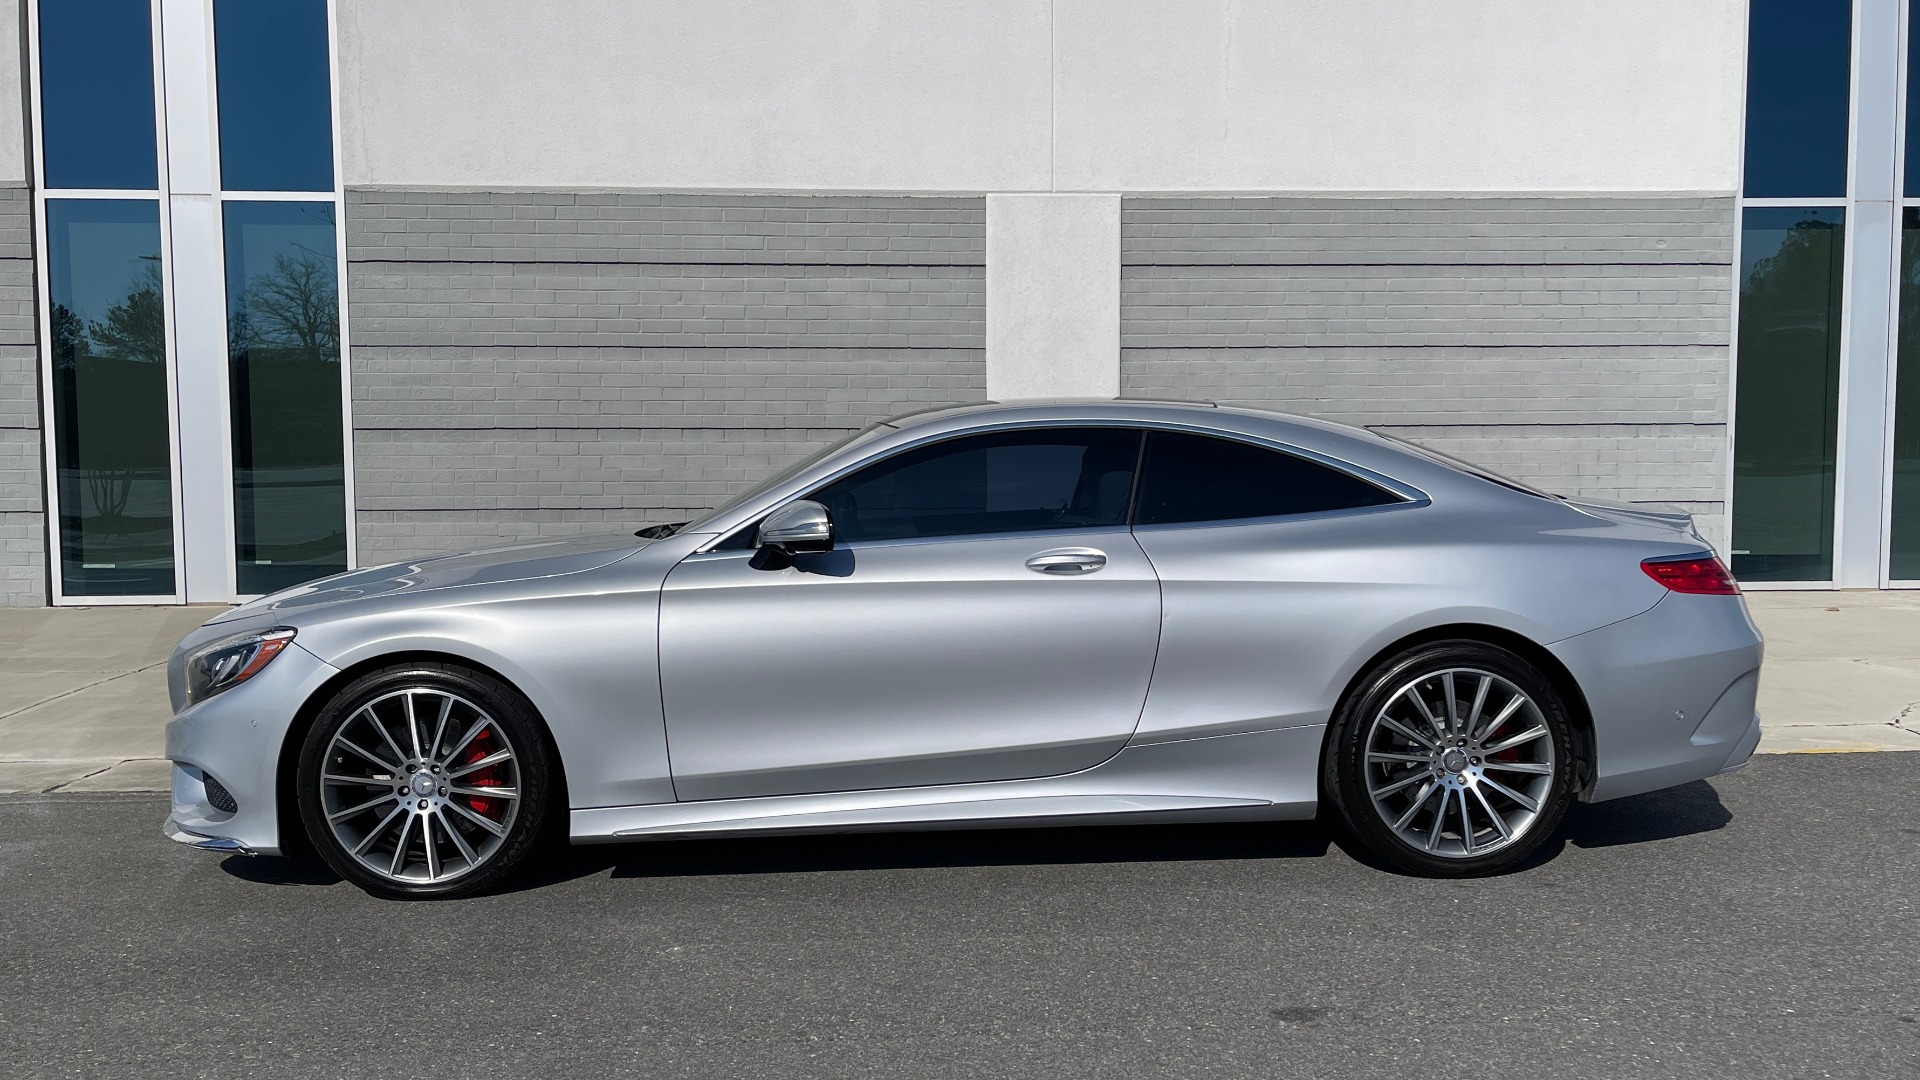 Used 2016 Mercedes-Benz S-CLASS S 550 4MATIC COUPE PREMIUM / SPORT / NAV / SUNROOF / REARVIEW for sale Sold at Formula Imports in Charlotte NC 28227 8